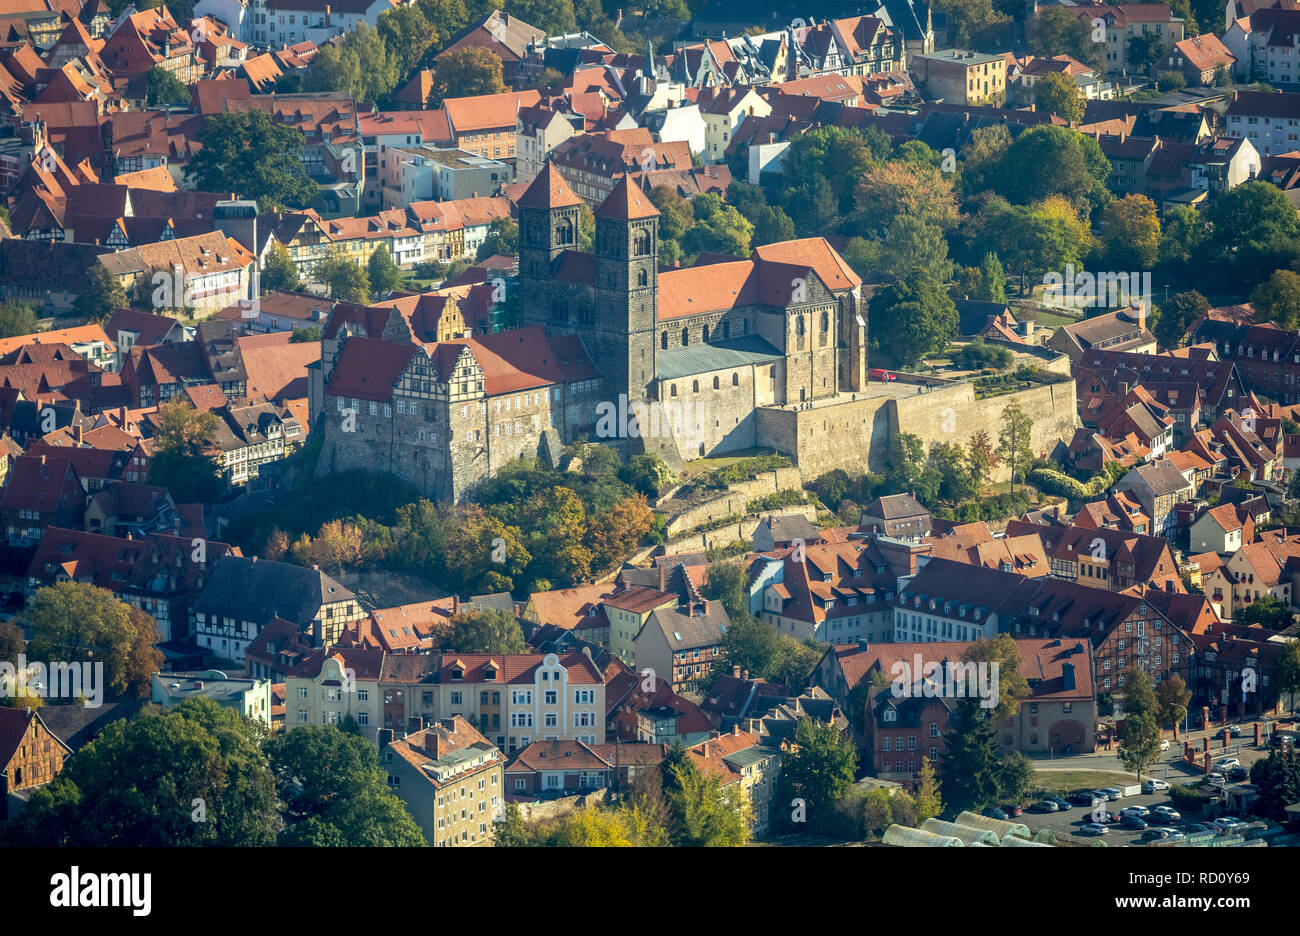 Aerial view, castle museum Quedlinburg, castle gate, old town with Burgberg-Sankt Wiperti-Münzenberg, castle mountain, Quedlinburg old town, district  Stock Photo